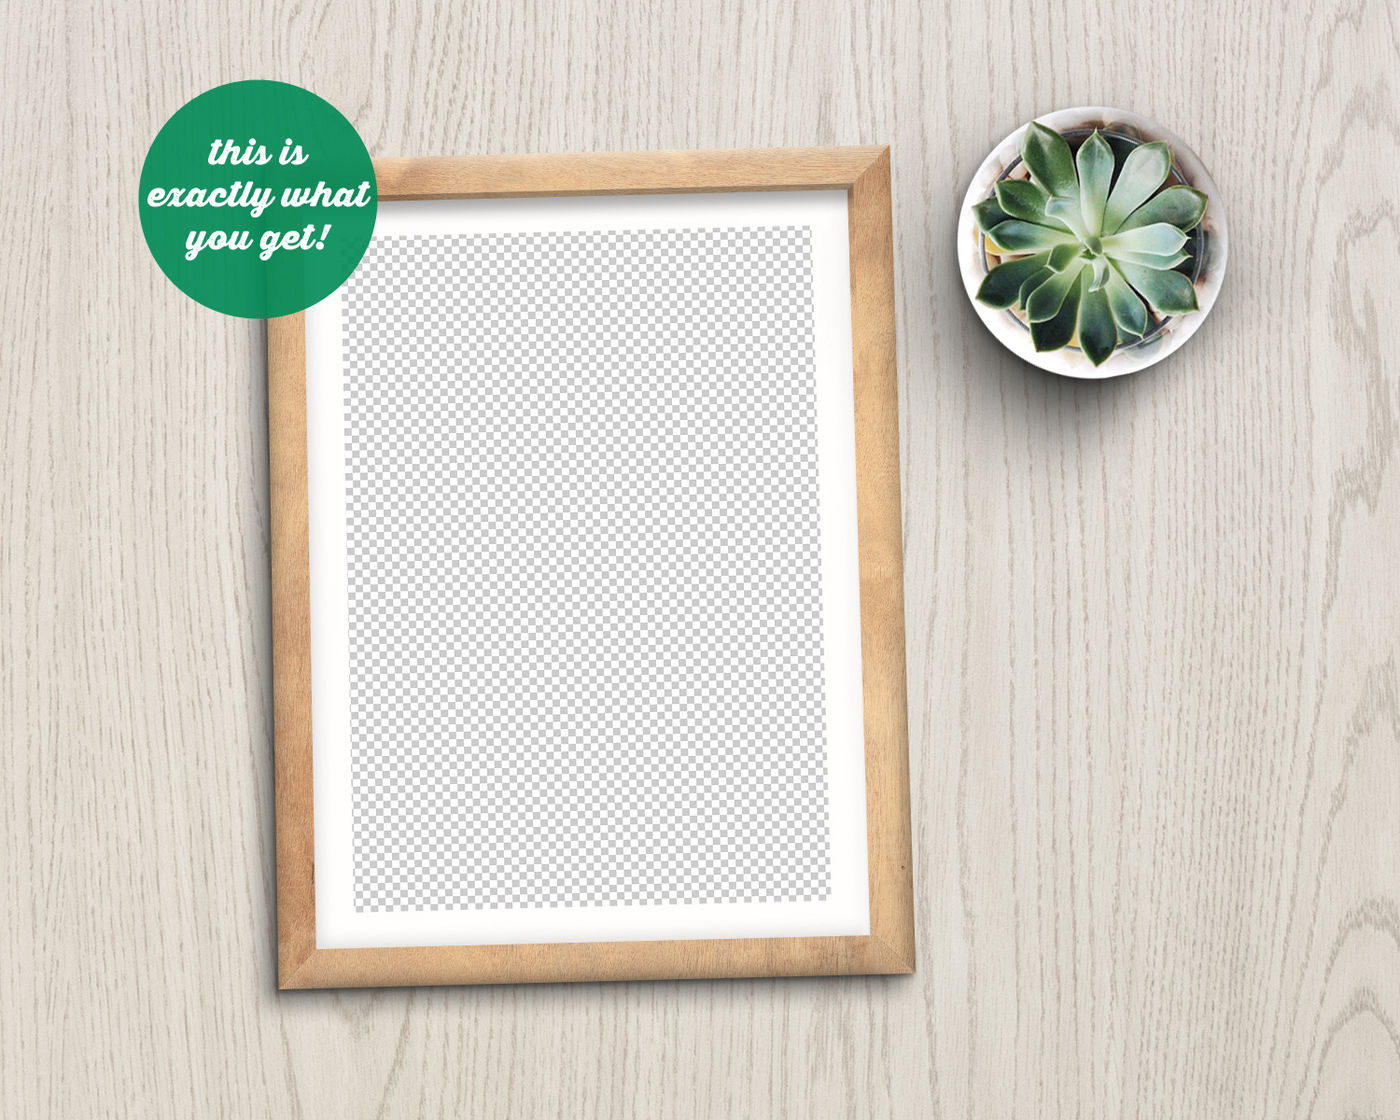 Download Non Photoshop Mockup Frame with Succulent By WithoutPhotoshop | TheHungryJPEG.com